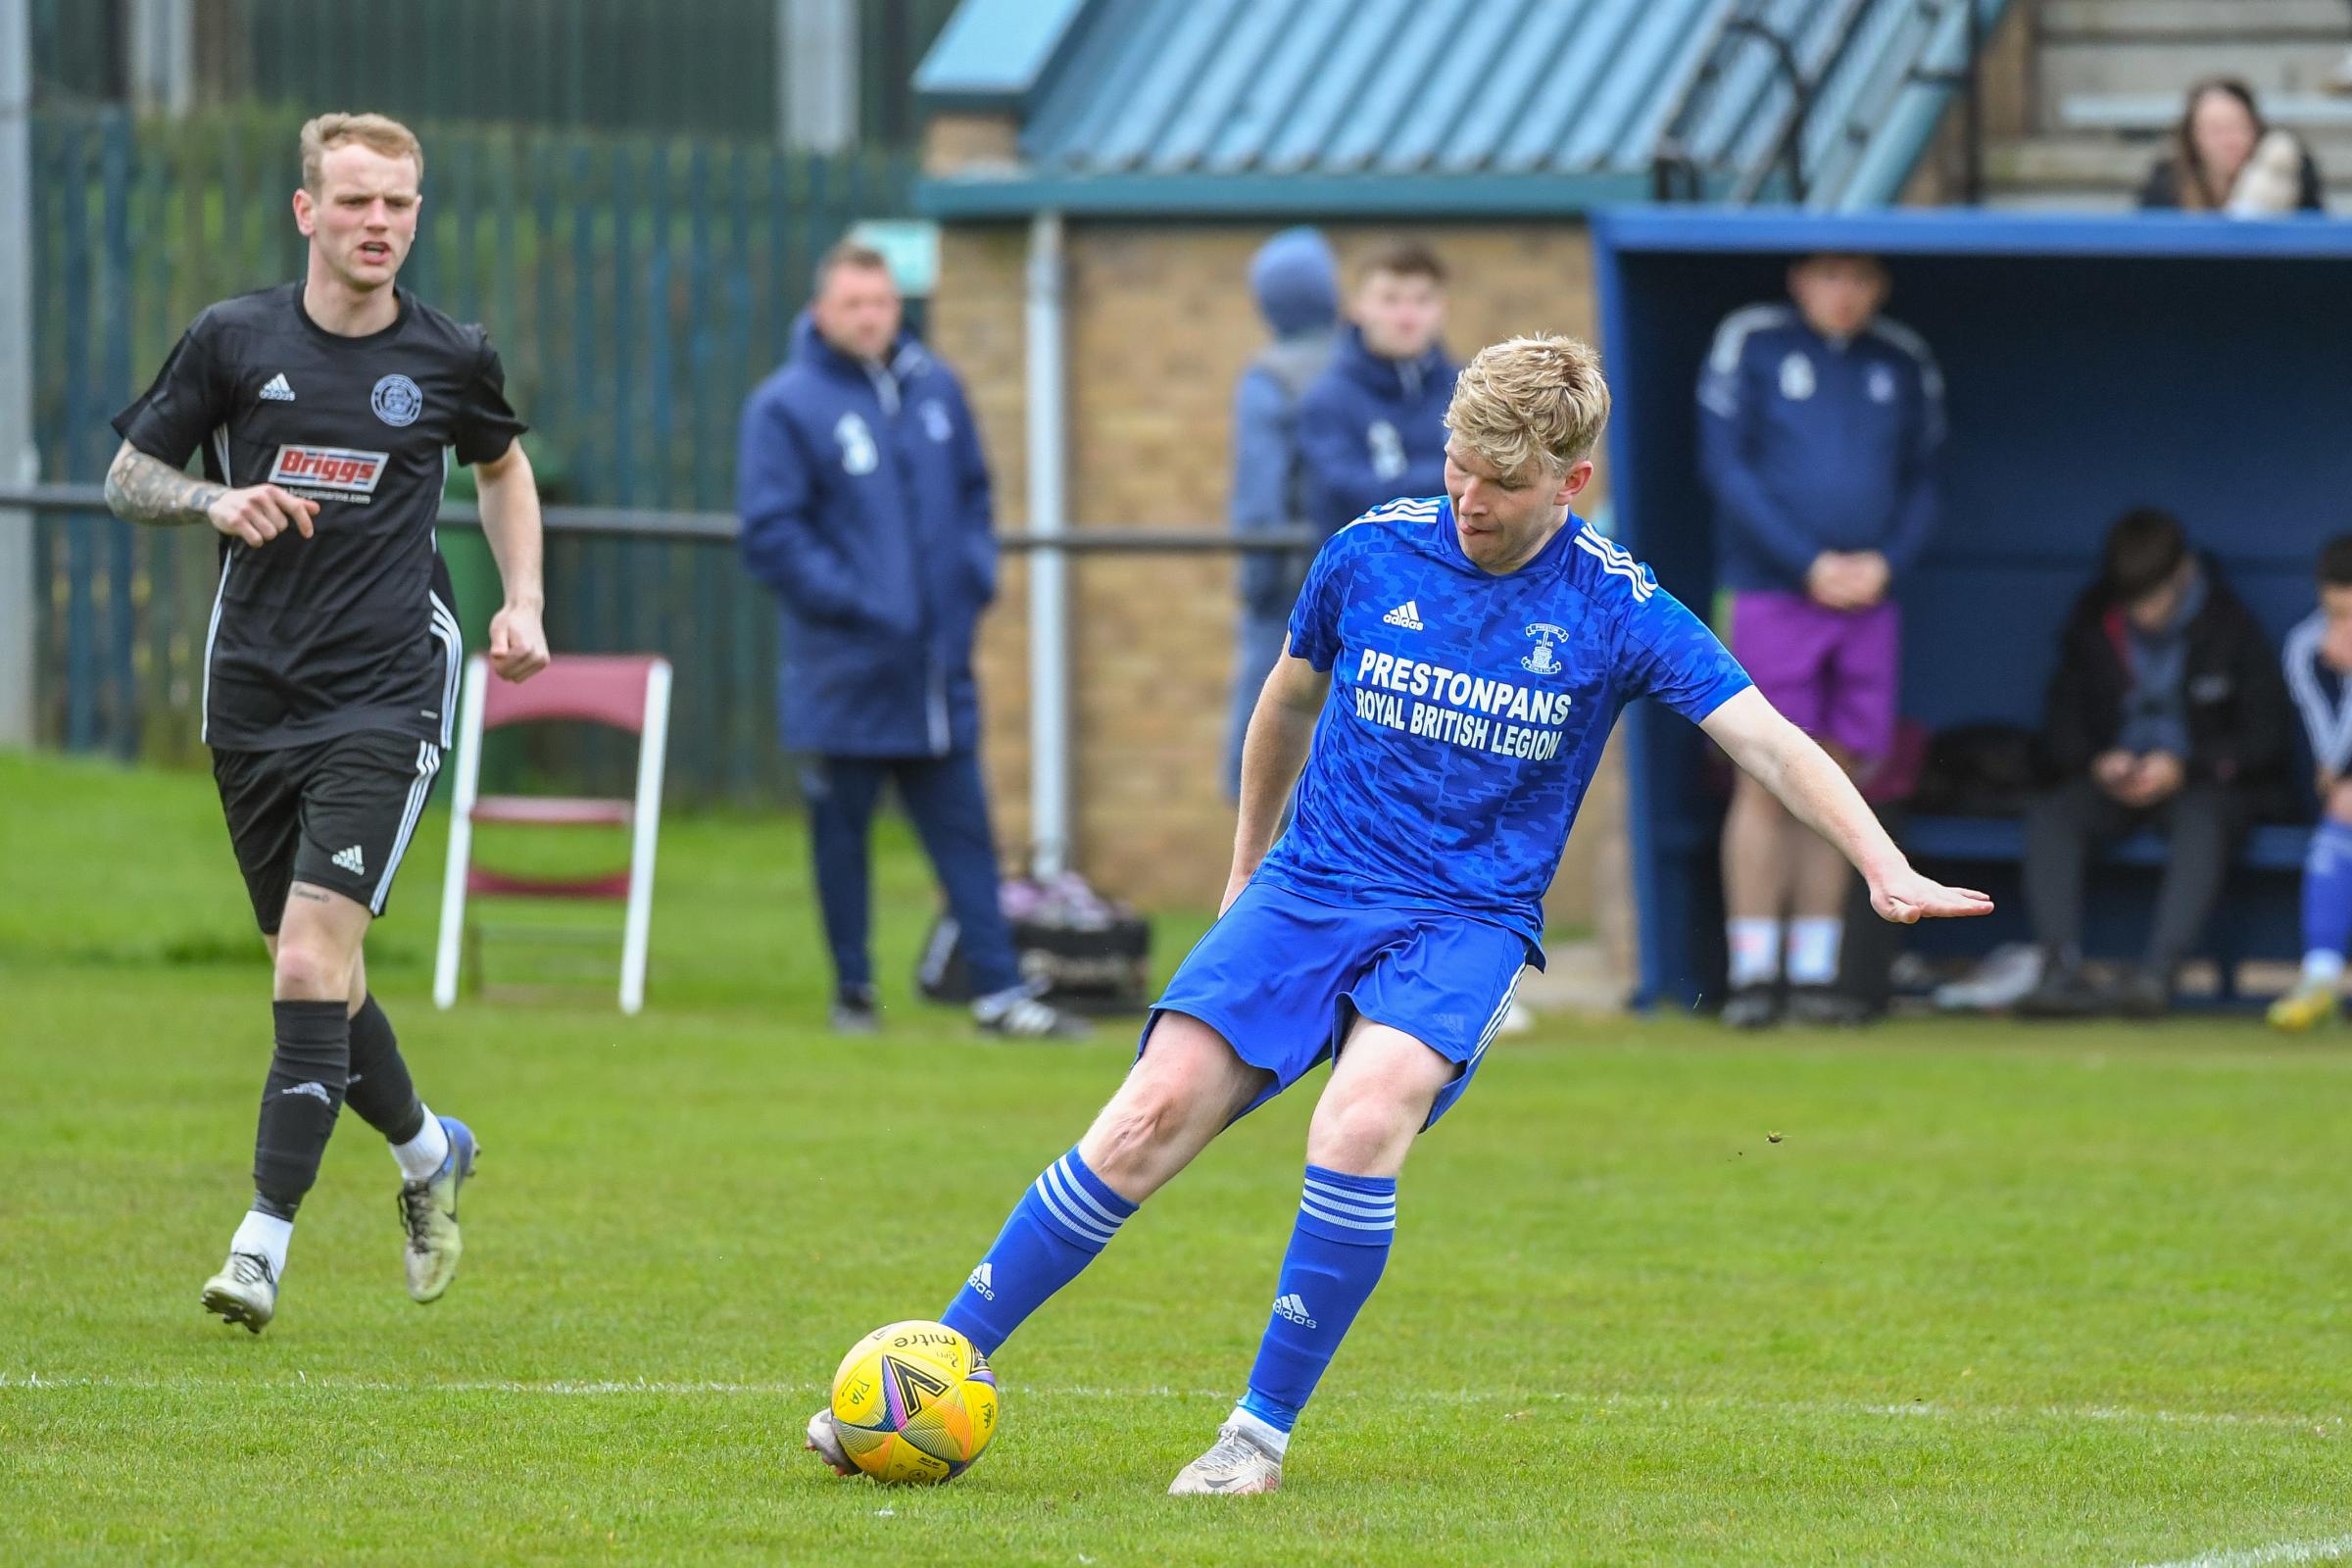 Preston Athletic (blue) head to Newburgh in the first round of the League Cup. Image: Gordon Bell.